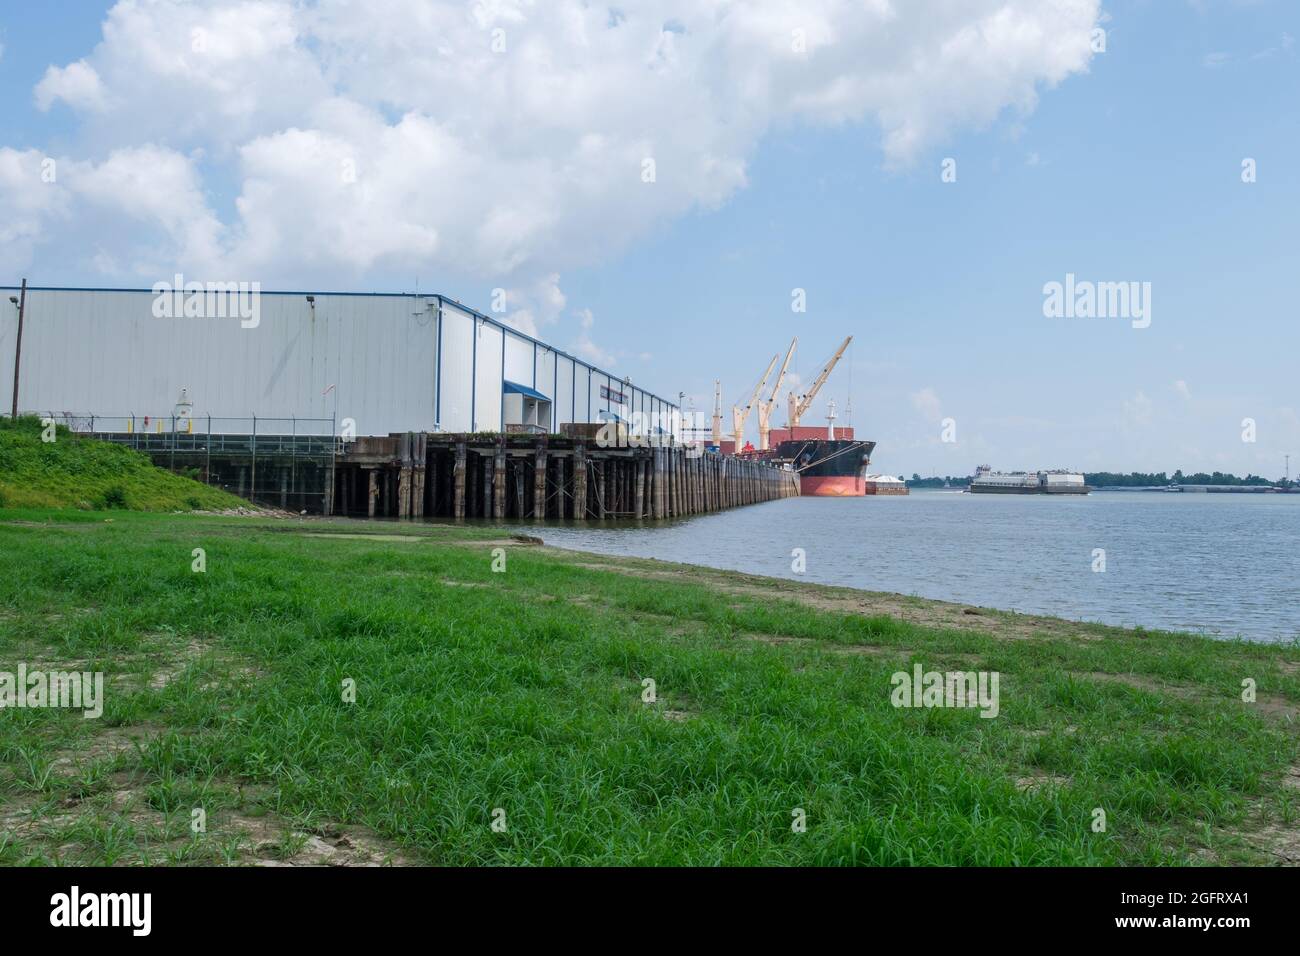 NEW ORLEANS, LA, USA - 25. AUGUST 2021: Henry Clay Avenue Wharf am Mississippi River Stockfoto